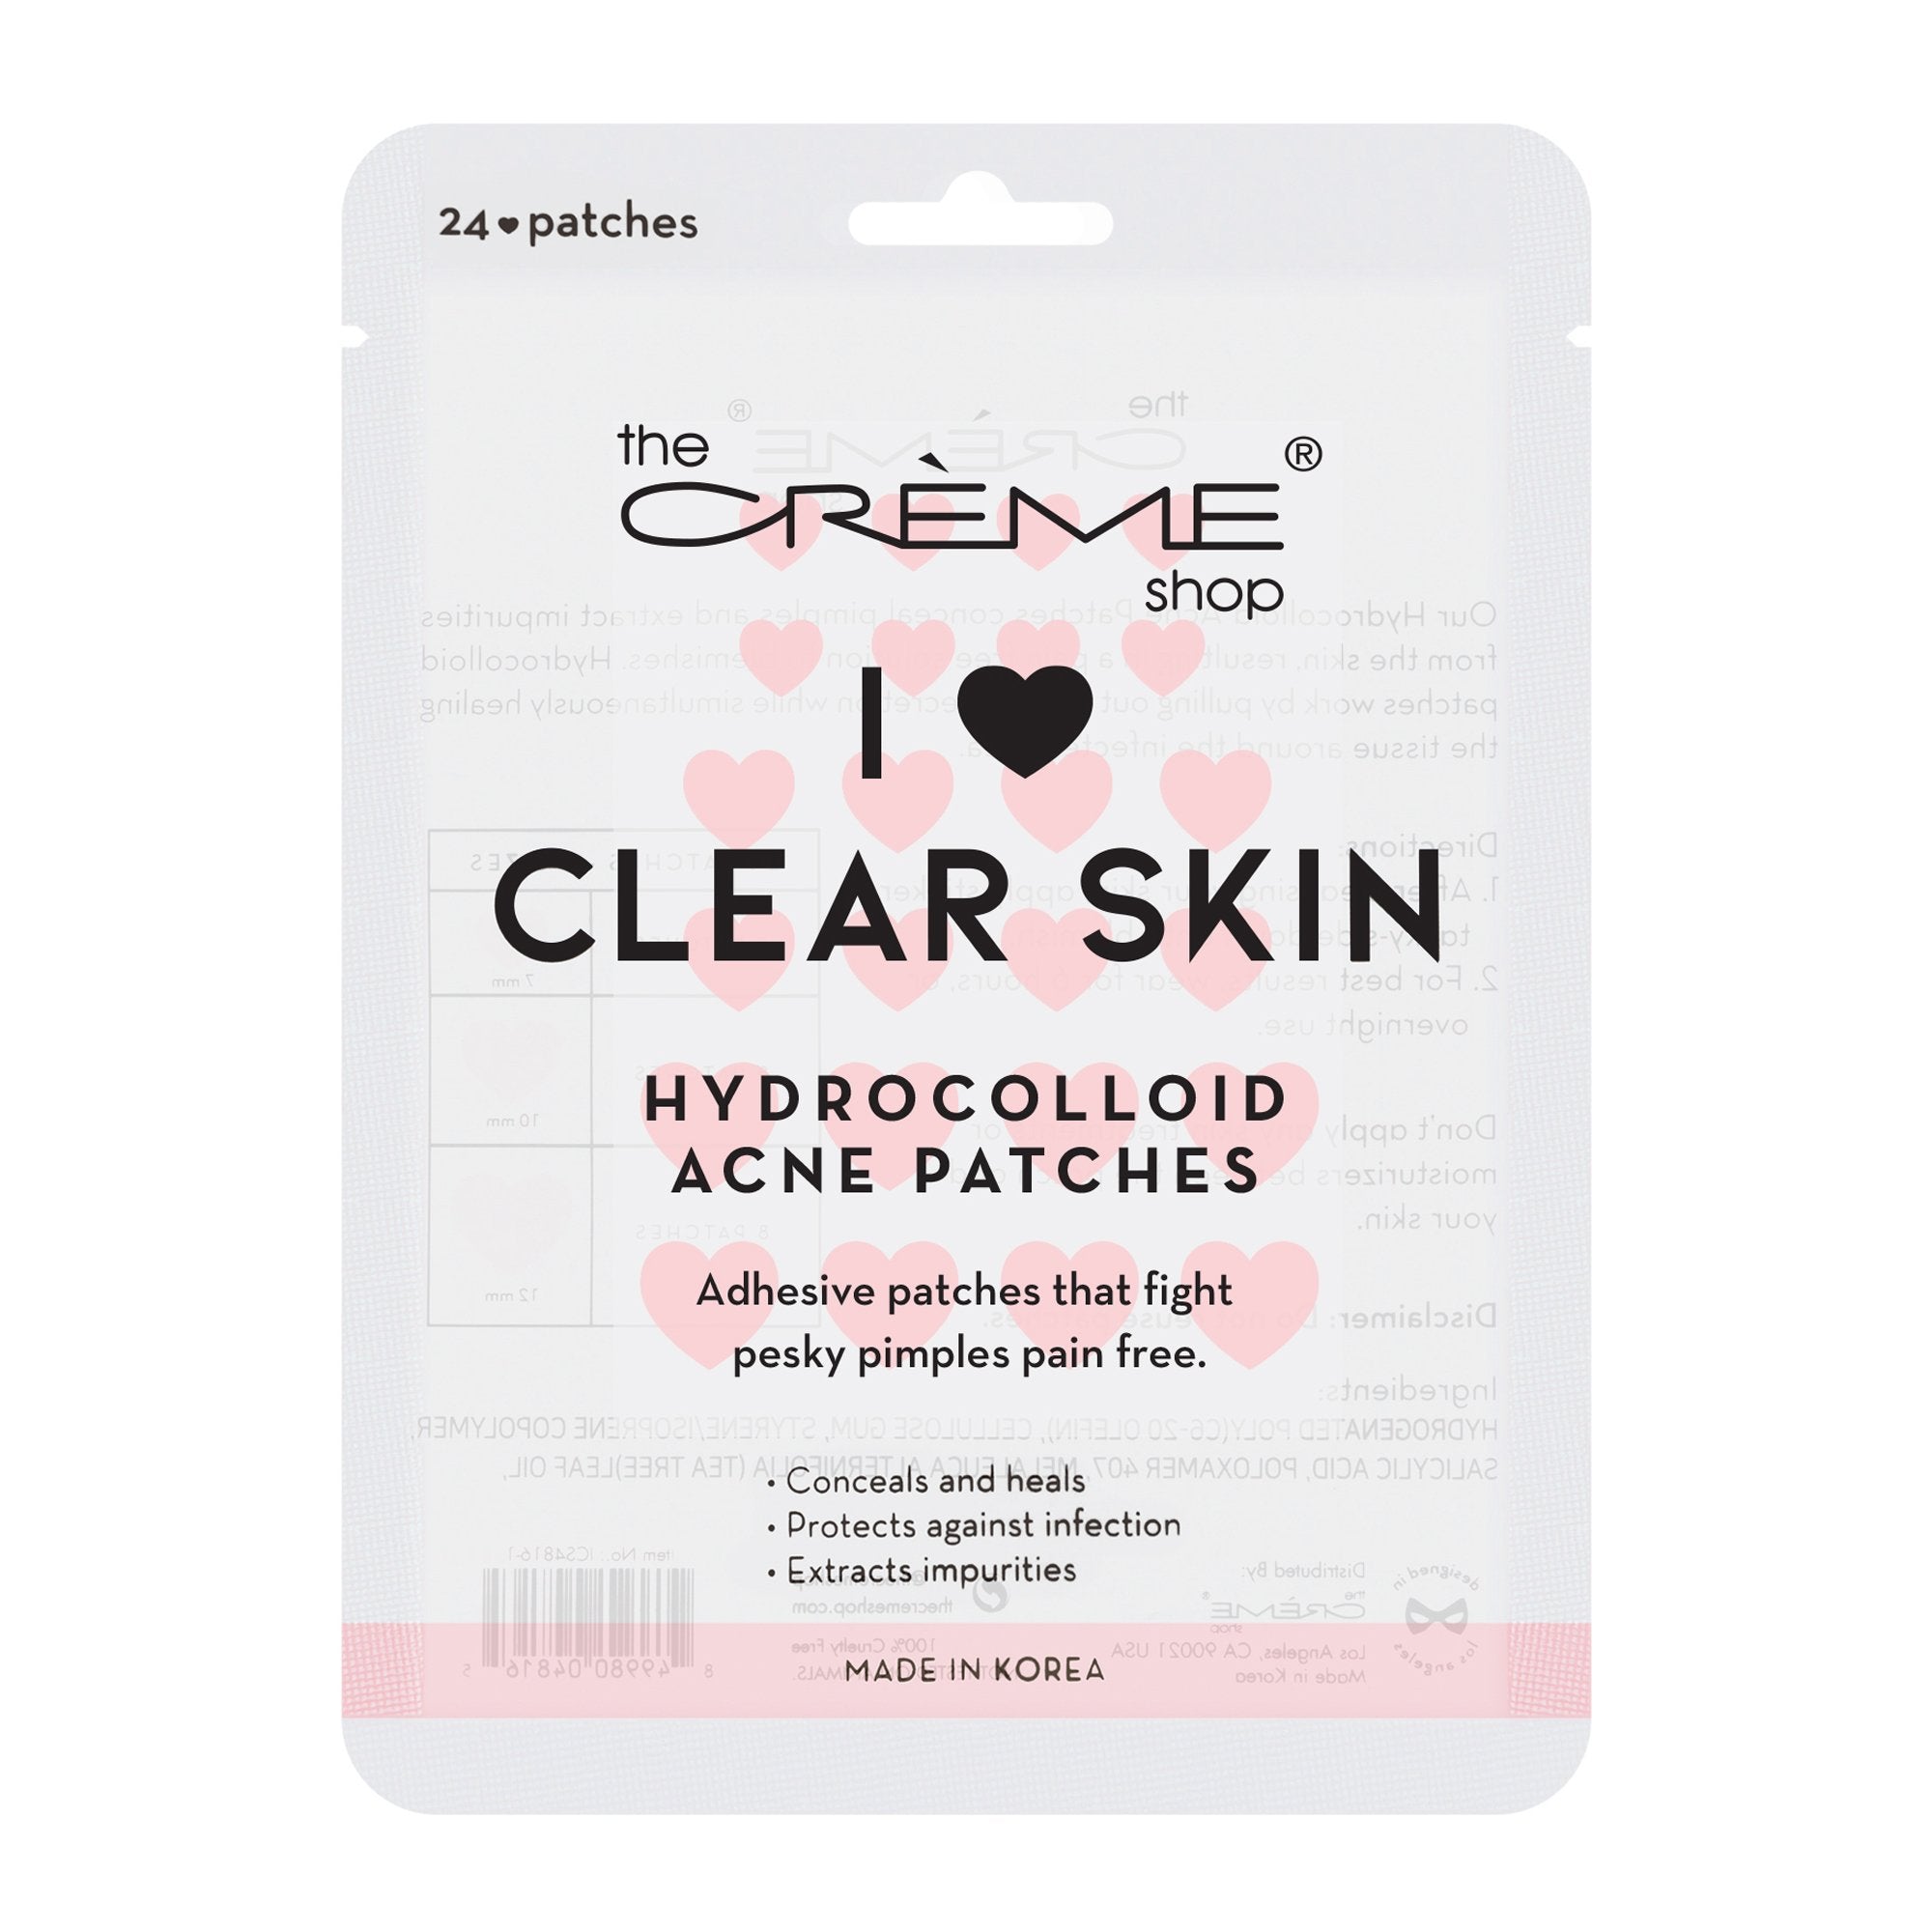 I ❤ Clear Skin - Hydrocolloid Acne Patches ️ - The Crème Shop